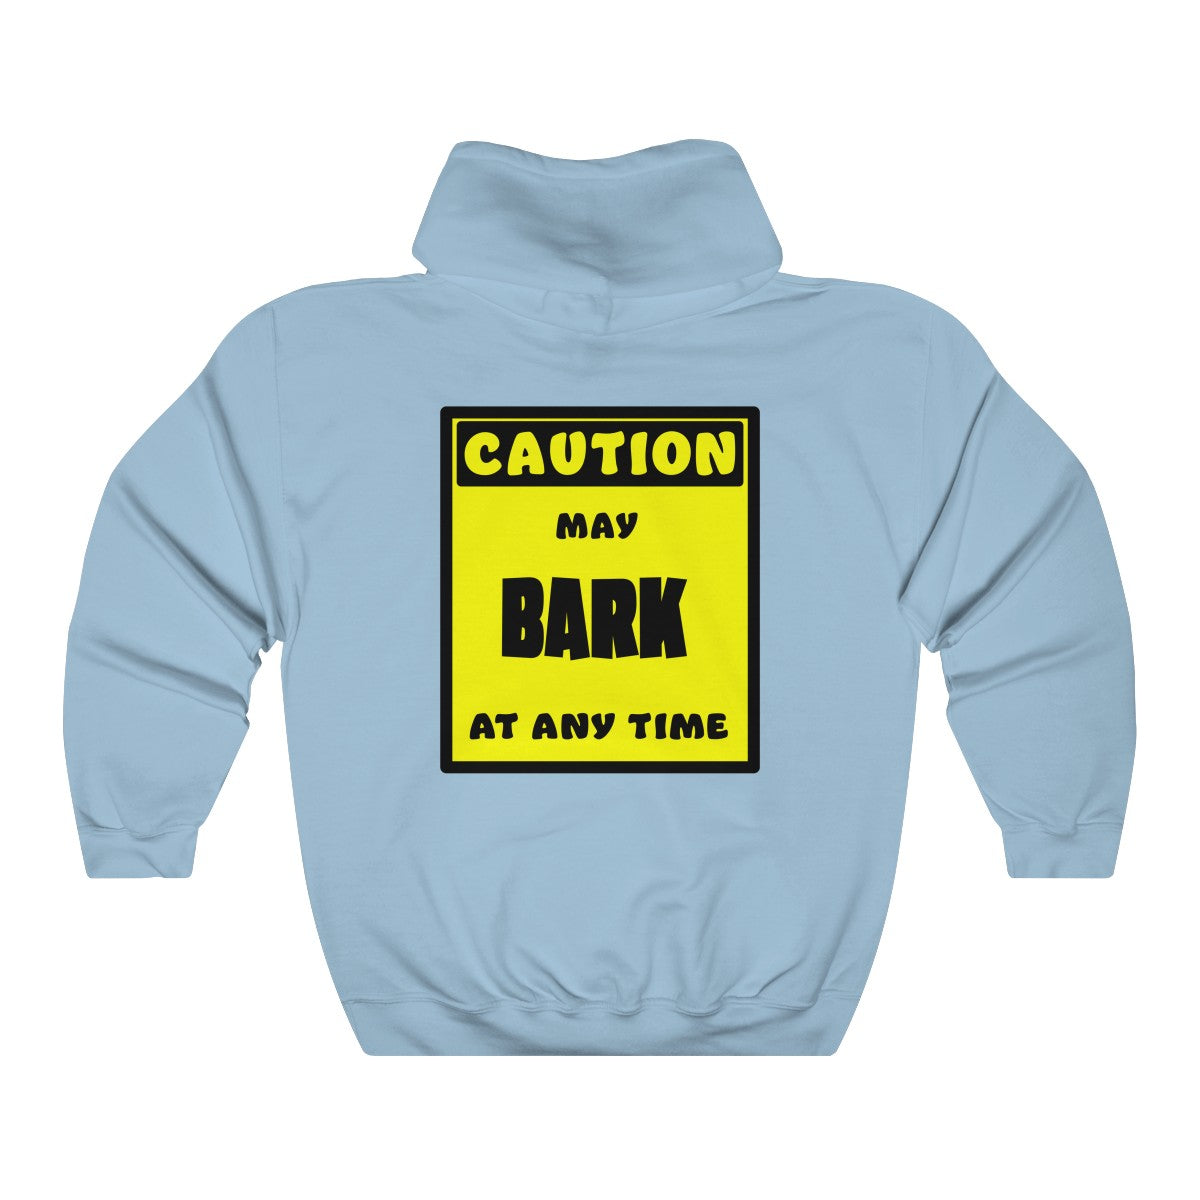 CAUTION! May BARK at any time! - Hoodie Hoodie AFLT-Whootorca Light Blue S 